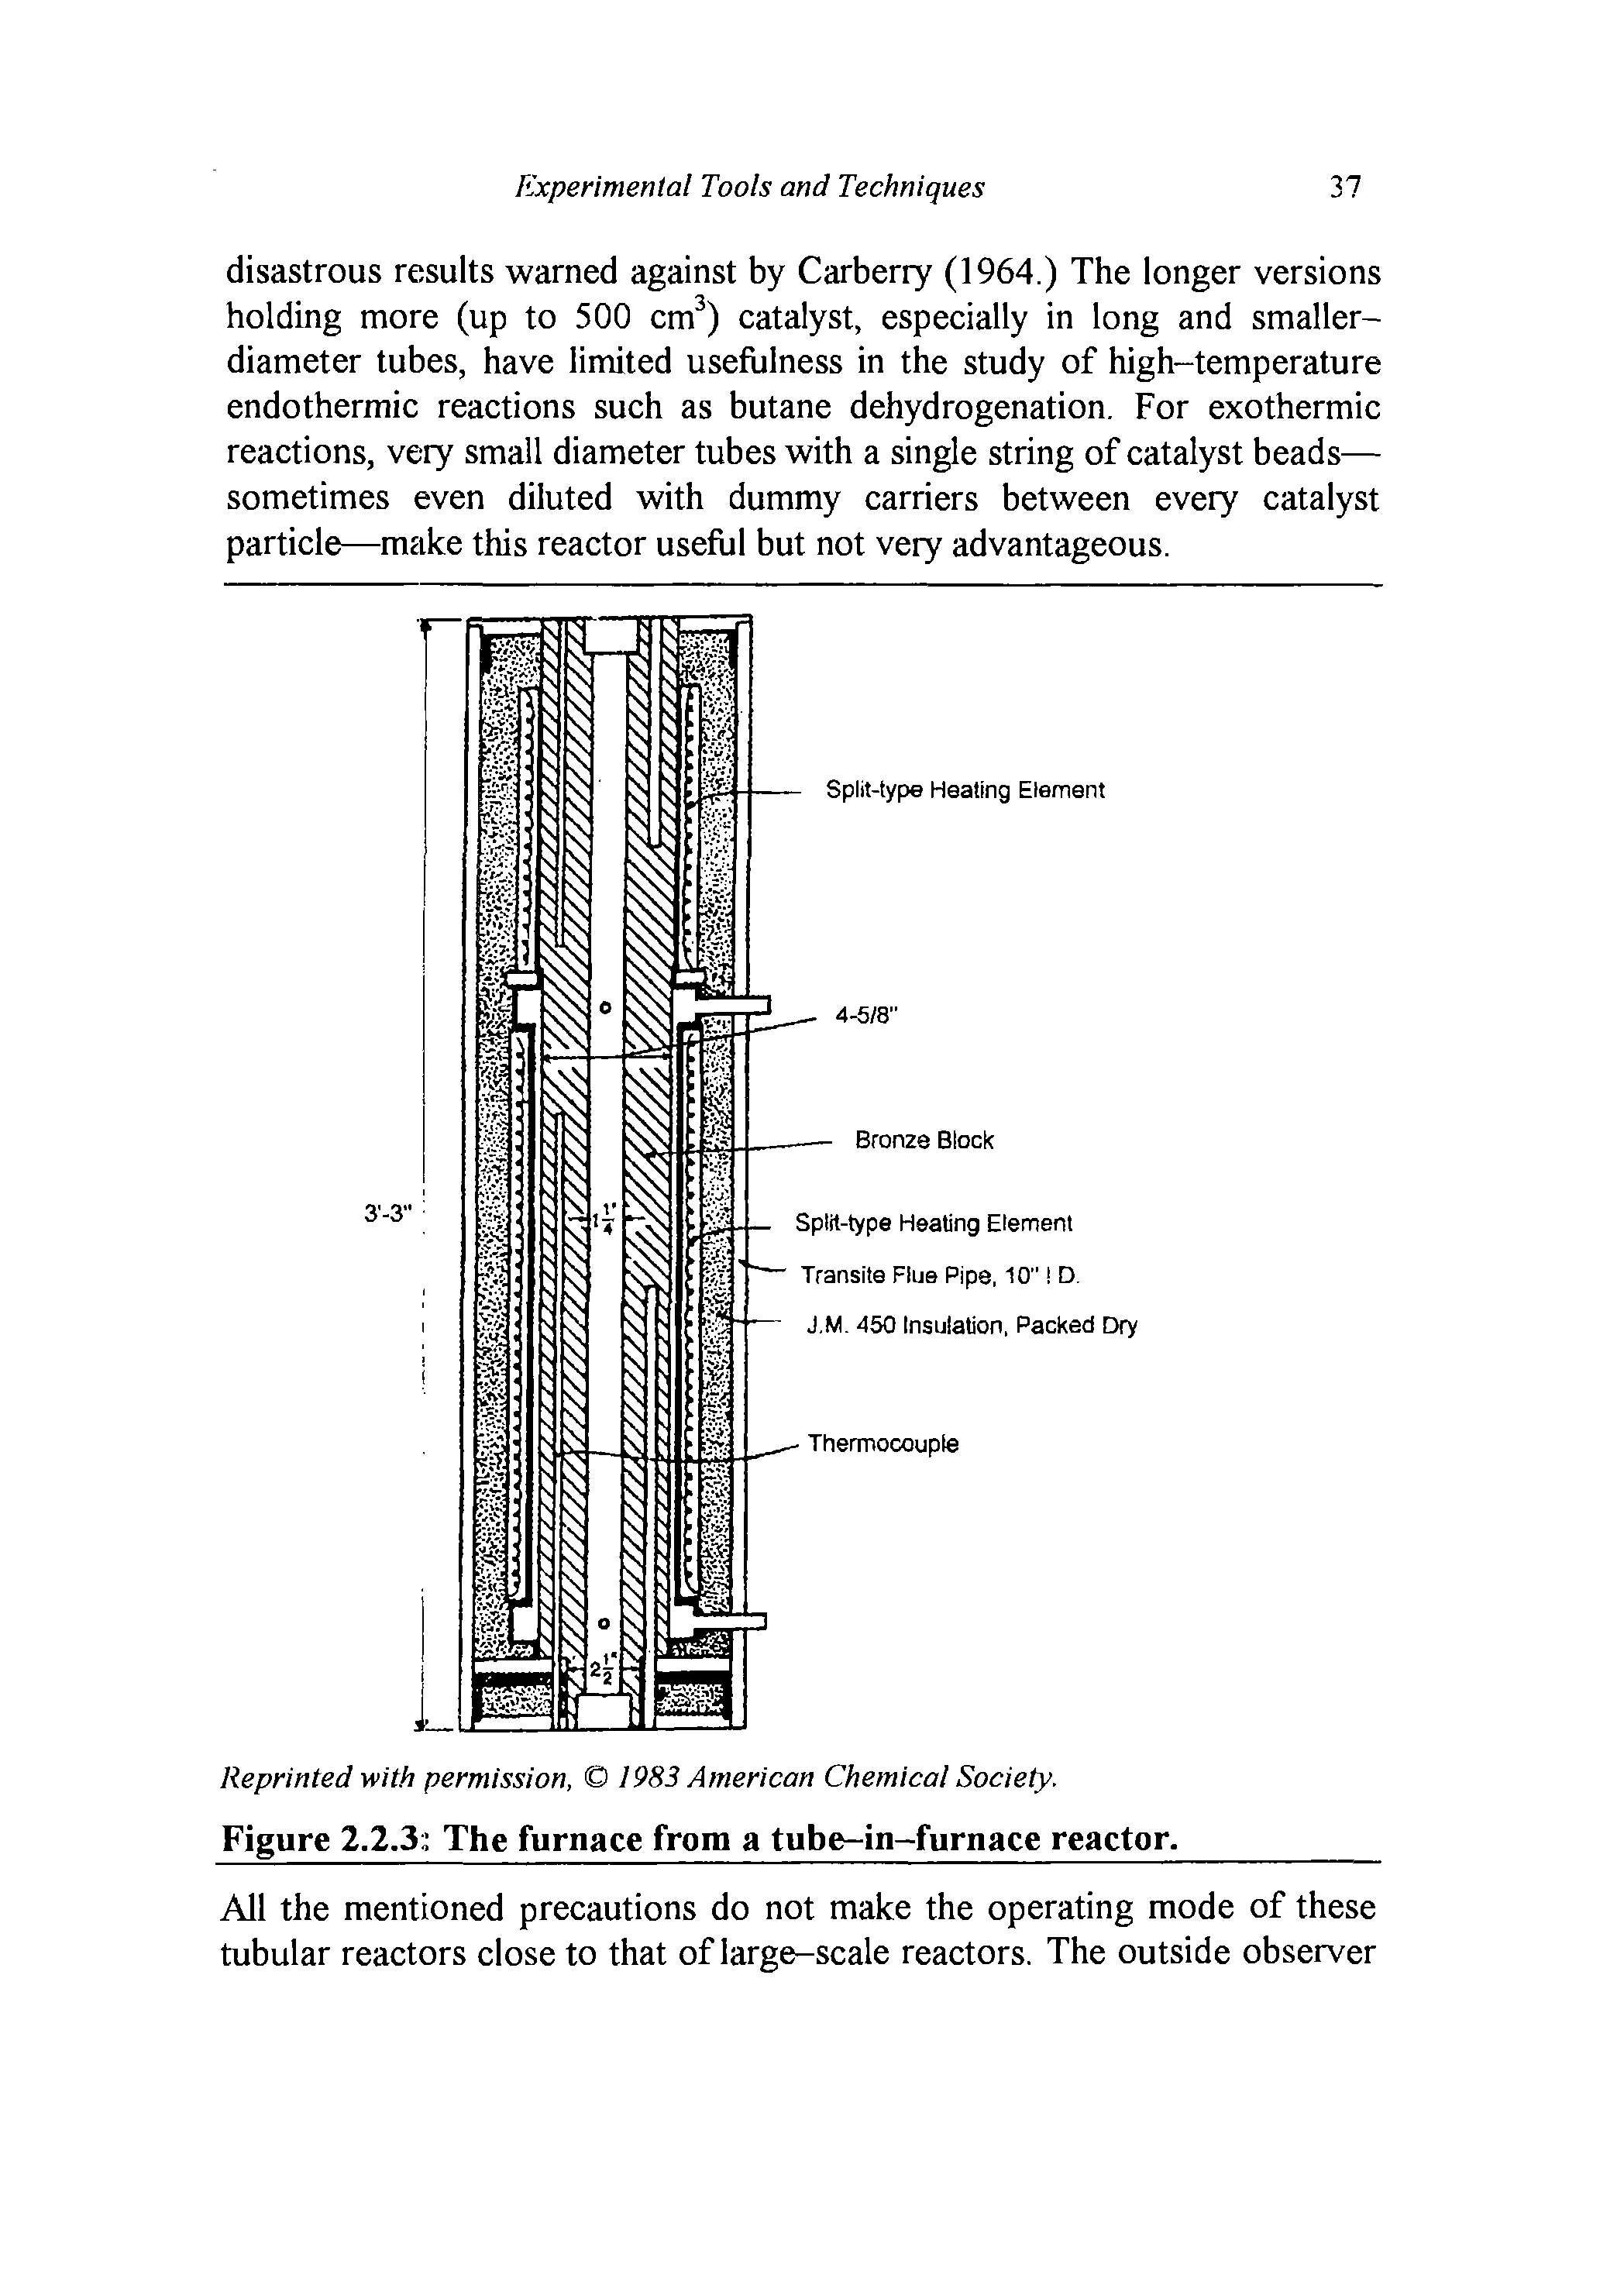 Figure 2.2.3 The furnace from a tube-in-furnace reactor. ...